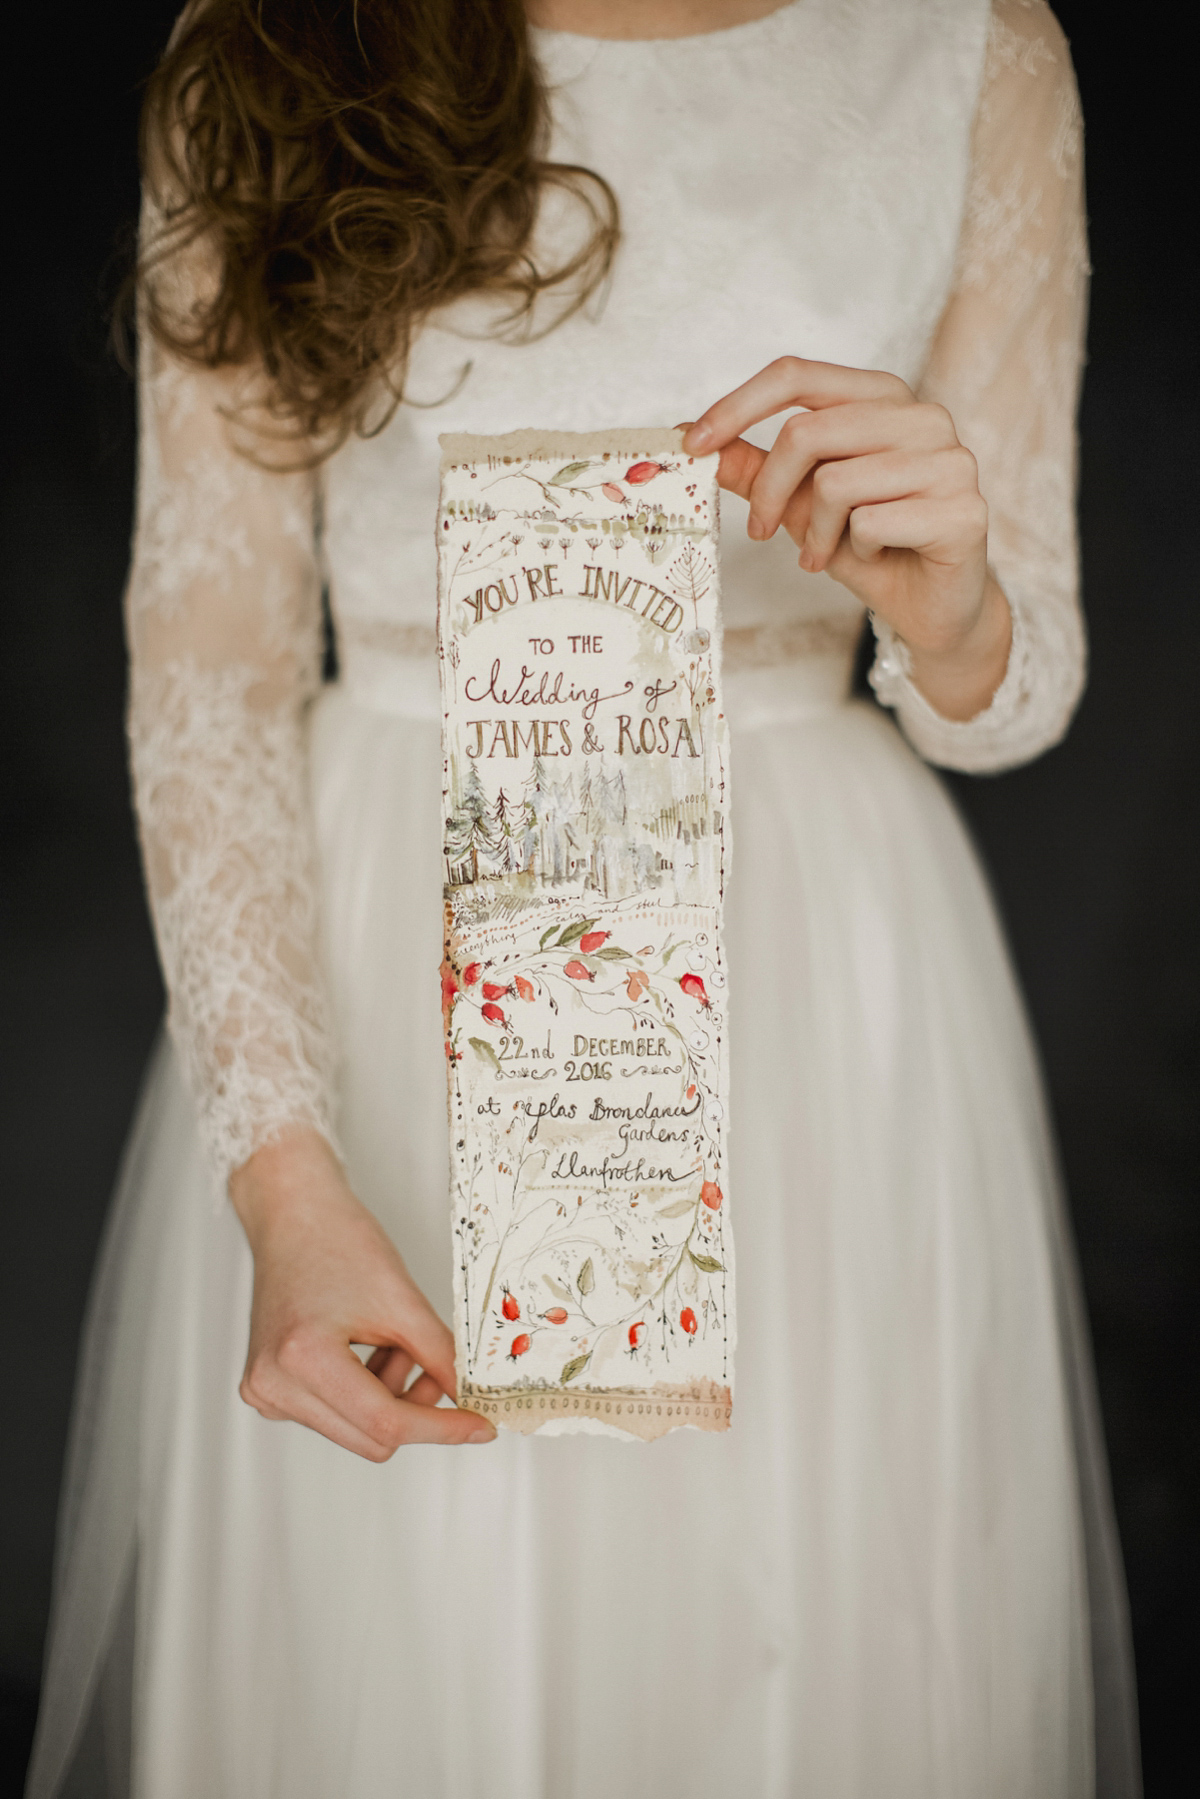 Wild and natural winter wedding inspiration by Amy Swann, photography by Jess Petrie.